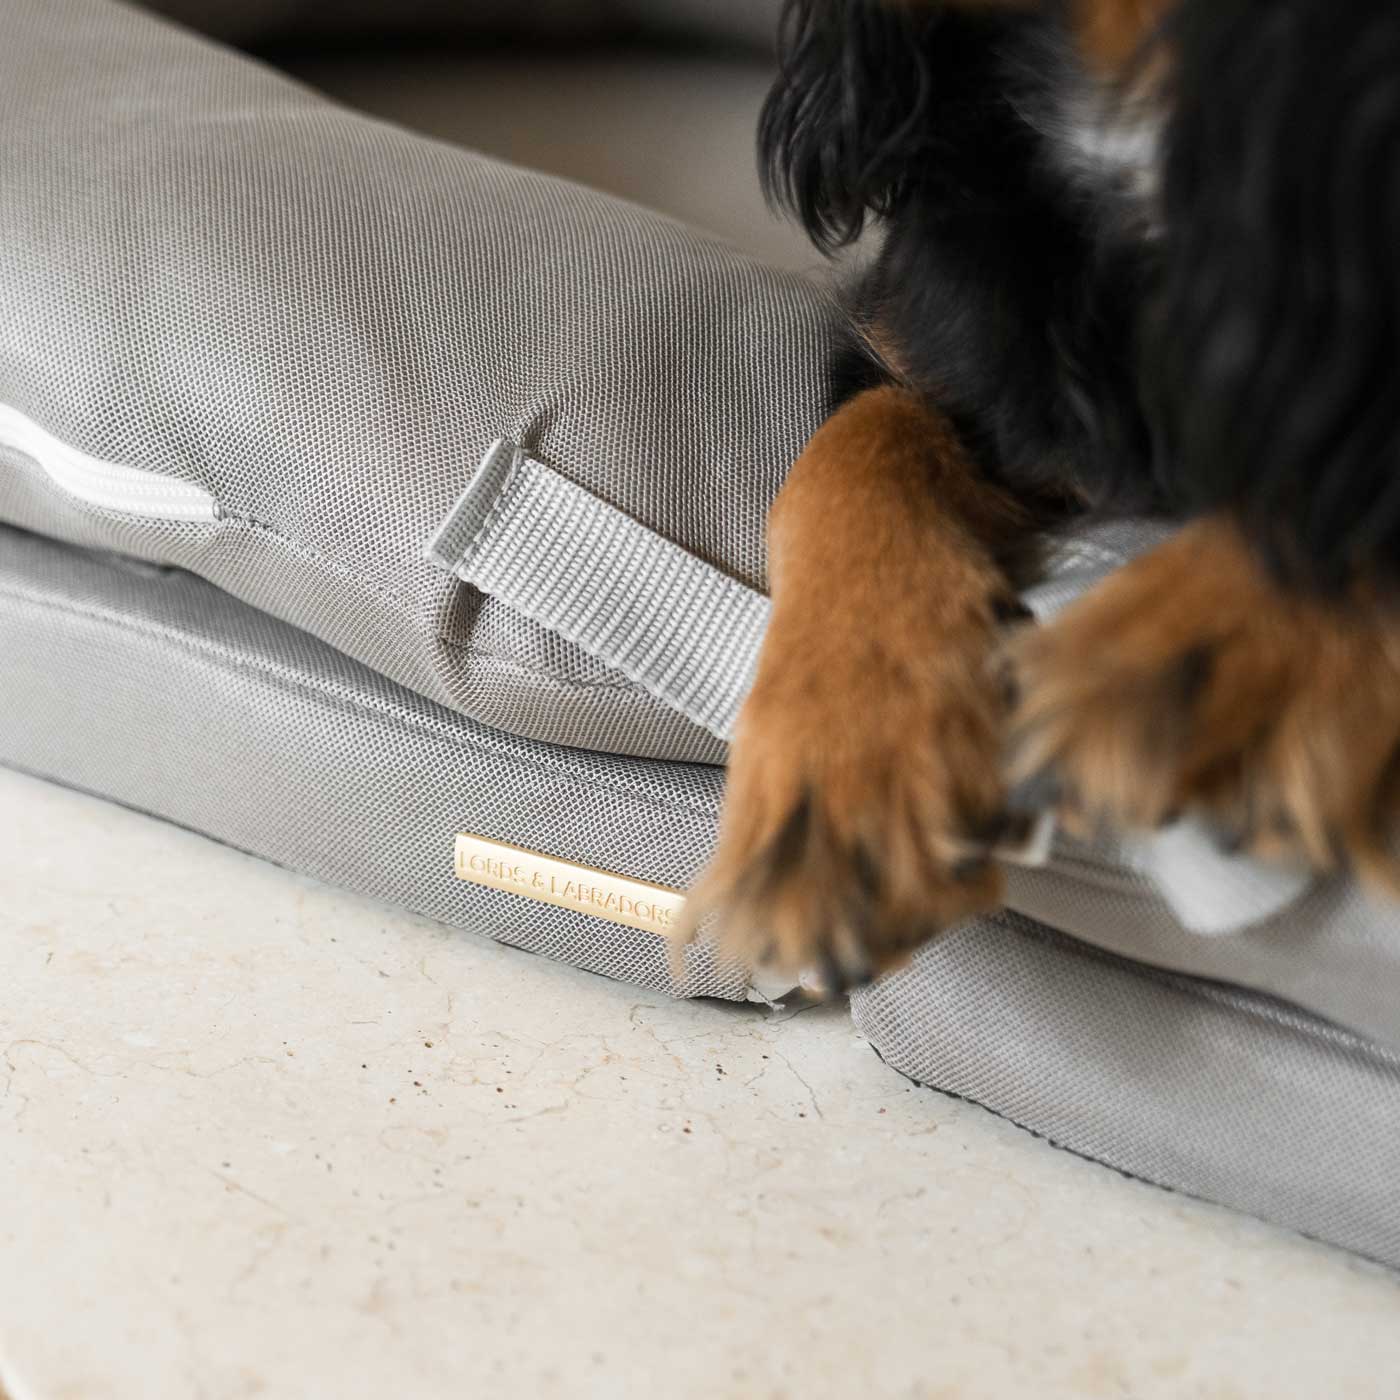 Discover Our Luxurious “The Ultimate Capsule” Dog Travel Bed, Crafted To Deliver A Non-Slip Base & Breathable Mesh Fabric For Extra Comfort! Bringing Your Canine Companion, The Perfect Travel Bed For Dogs To Curl Up To! Available Now at Lords & Labradors US